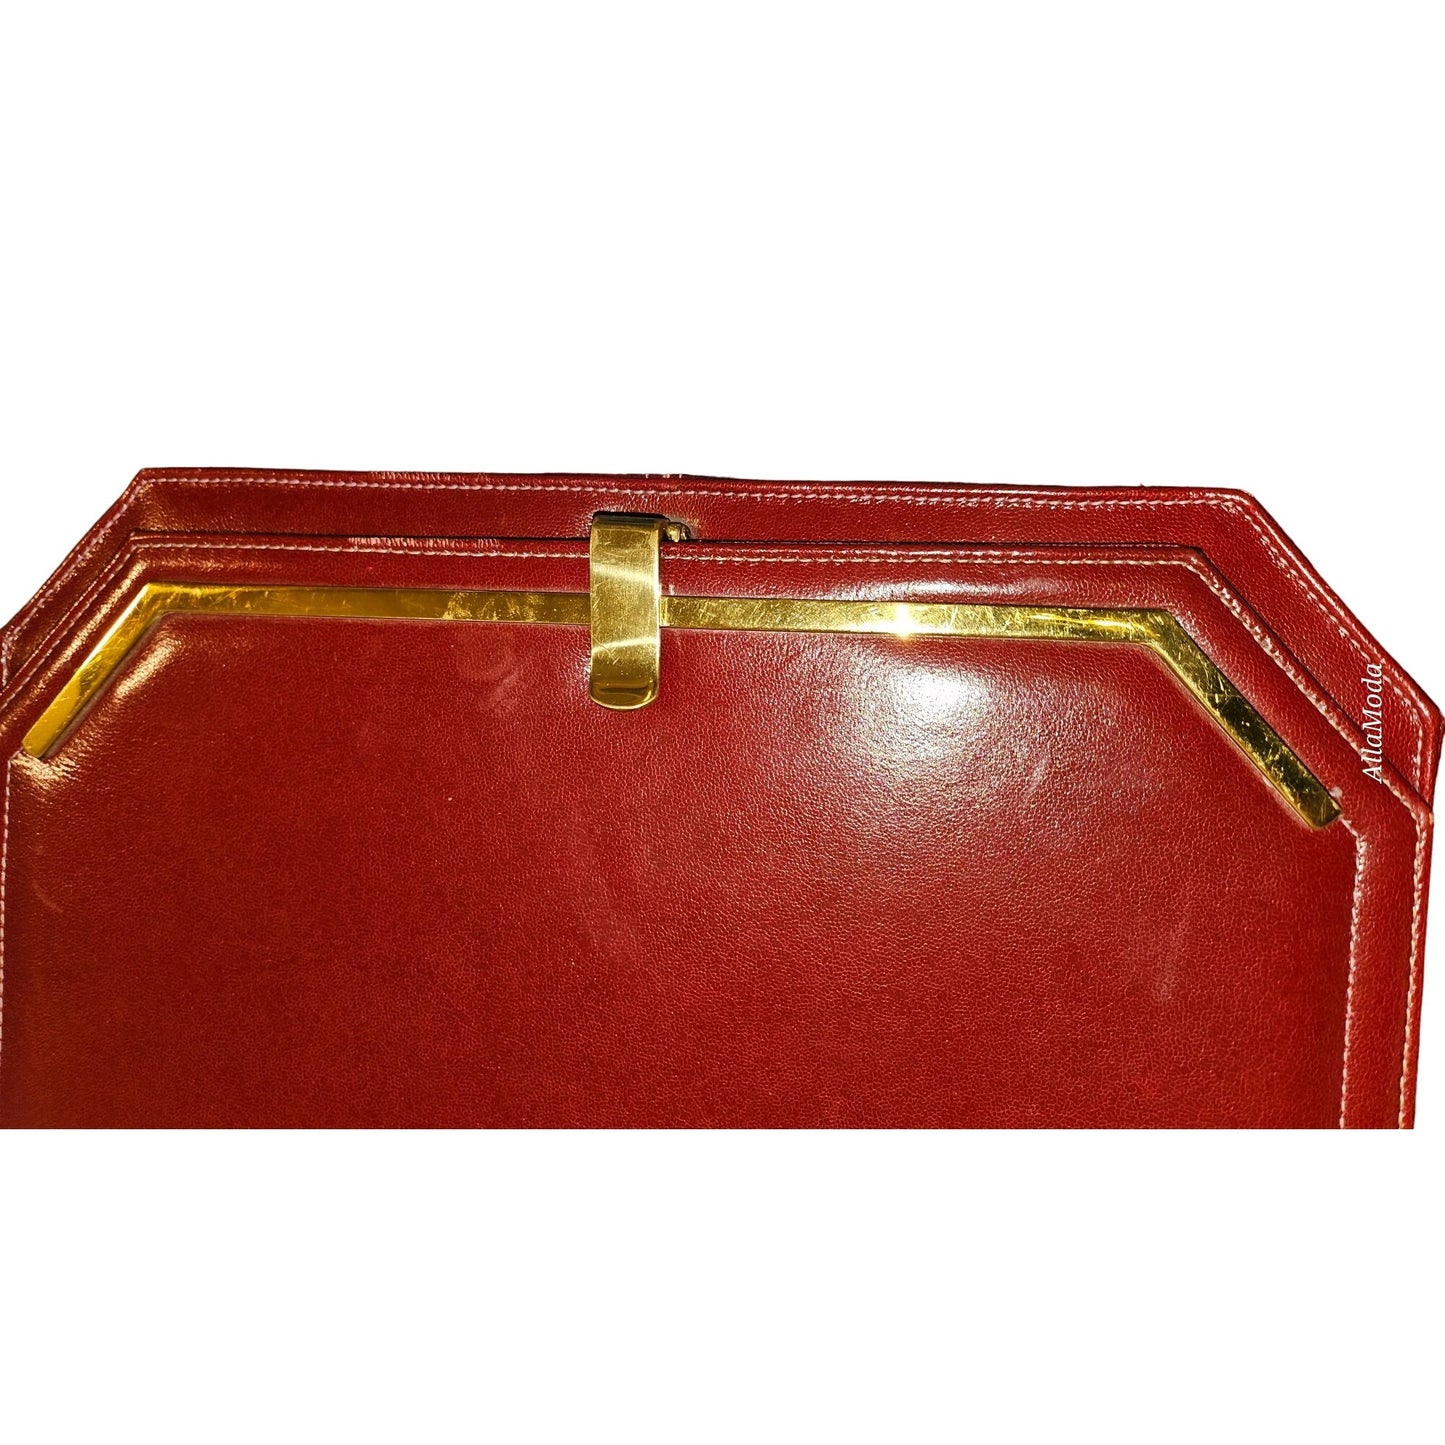 Lewis NOS NWT Red Leather Clutch w Bold Gold Accents